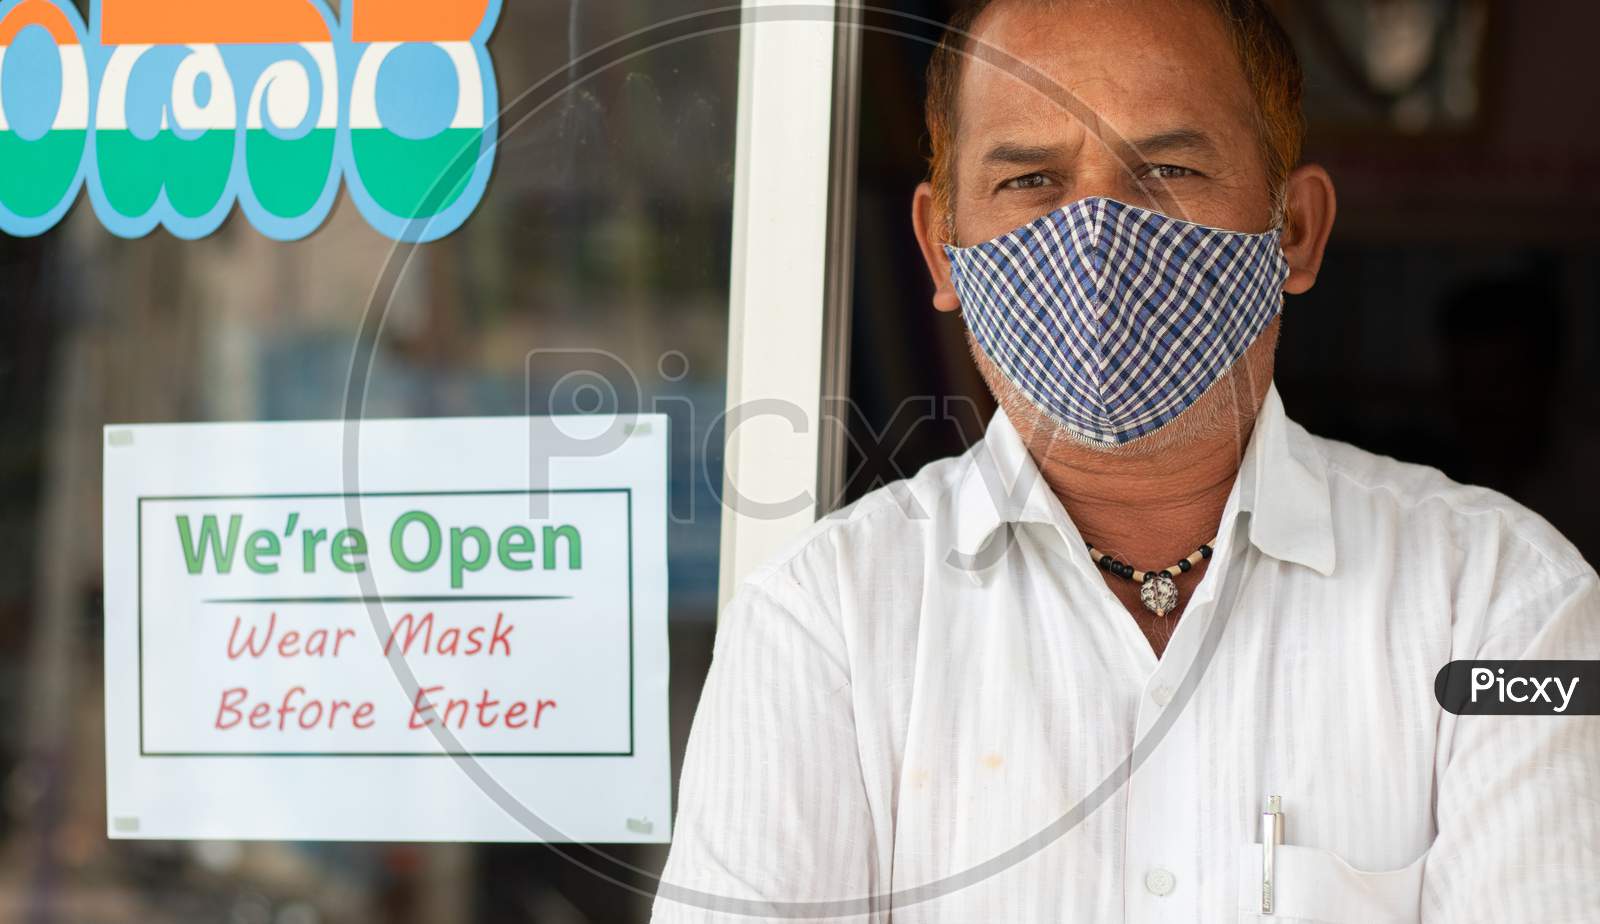 Small Business Owner In Medical Mask Standing In Front Of Door With We Are Opn Wear Mask Notice Board - Concept Of Support Local Community During Coronavirus Or Covid-19.